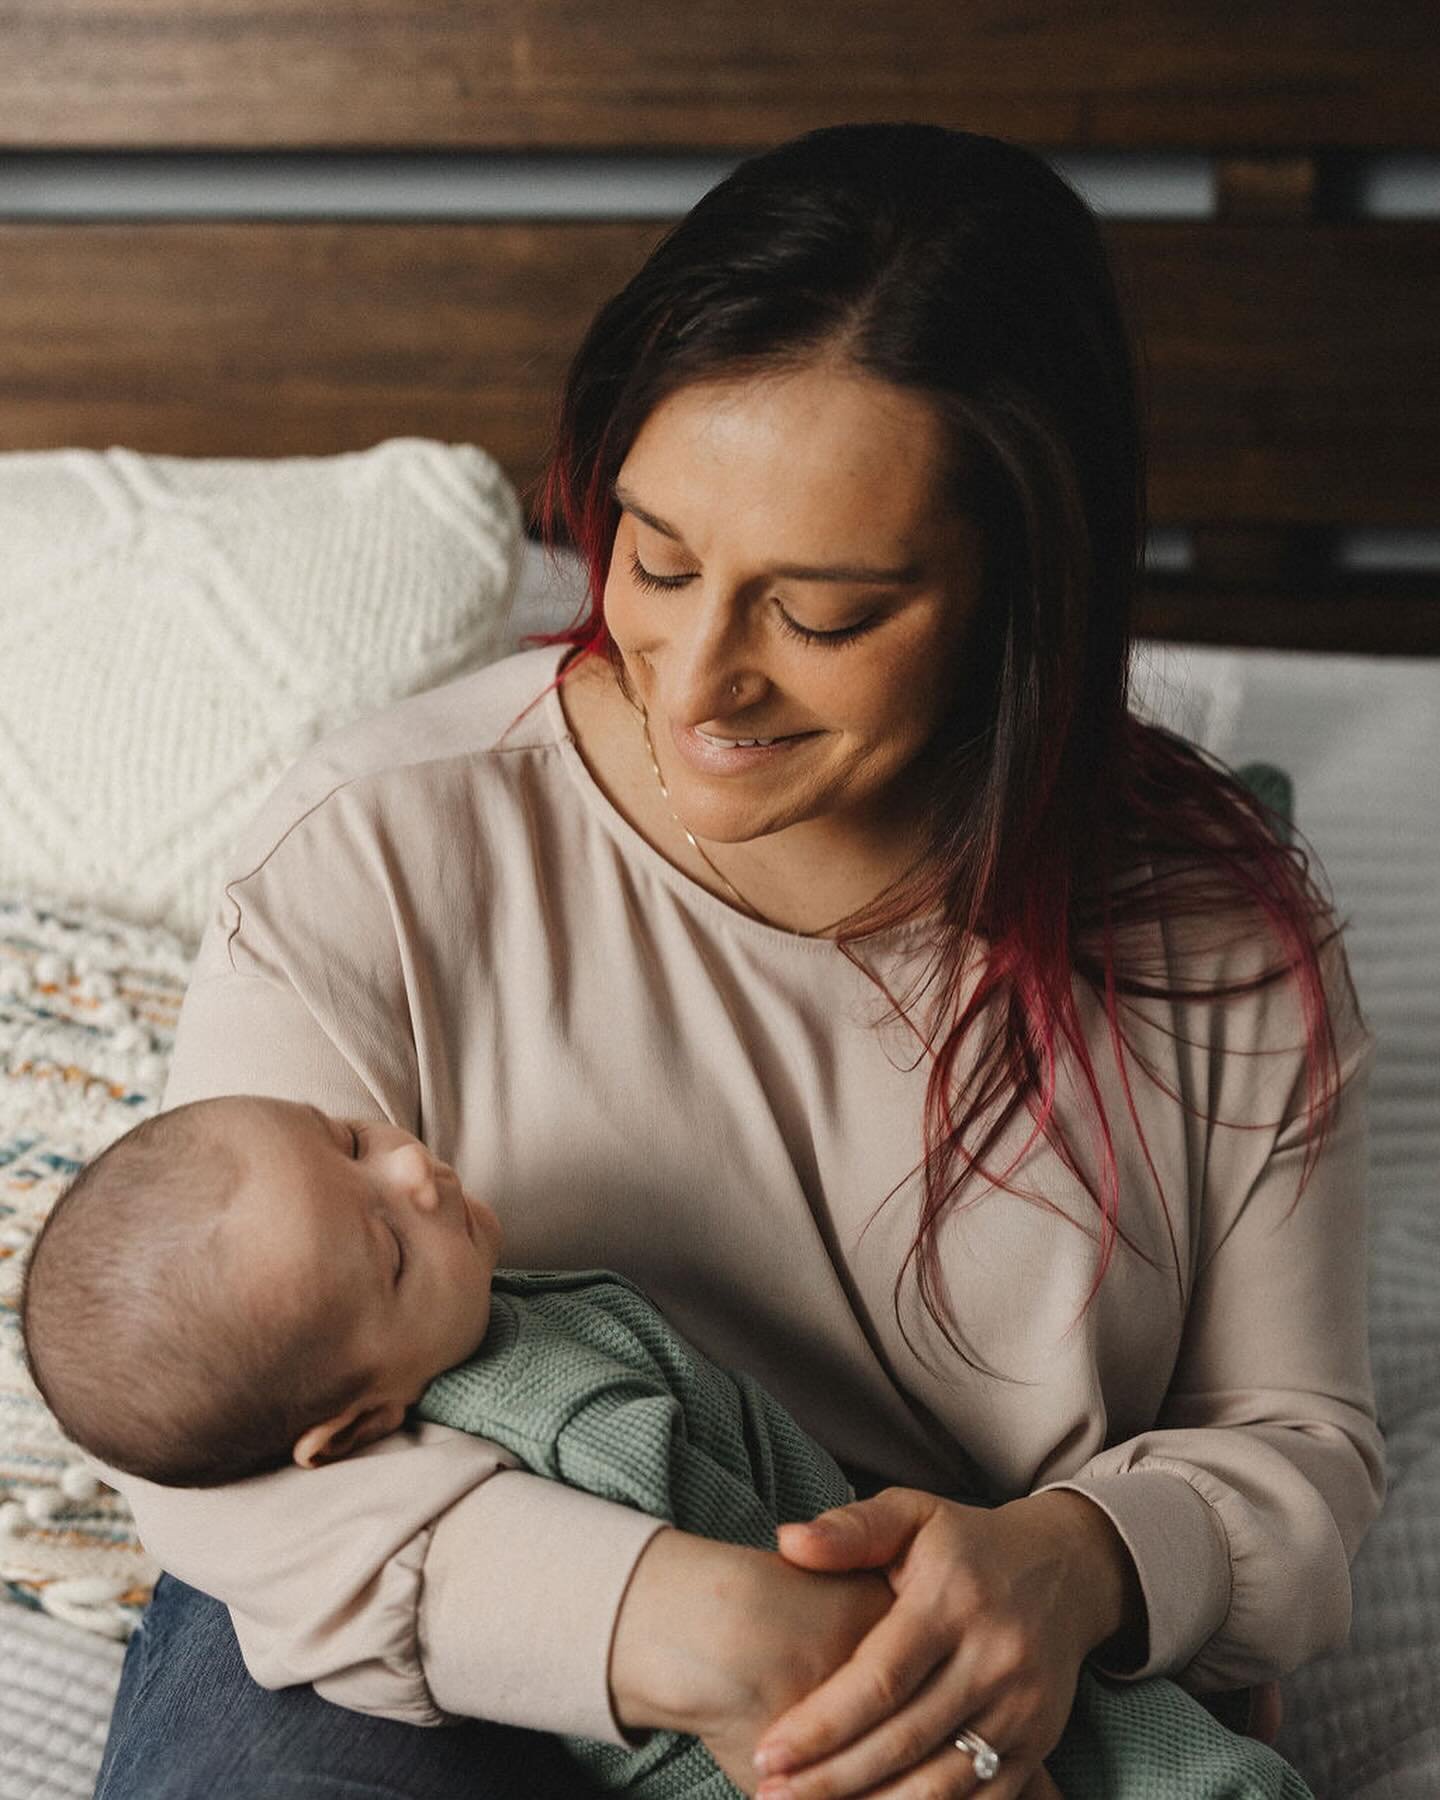 &ldquo;I held you so tightly in my arms, traced your fingers that were gently curled, through tears of joy, I whispered quietly, my beautiful child, welcome to the world.&rdquo; 

Sweet baby Jackson, you are so very loved 🤍

If you are pregnant and 